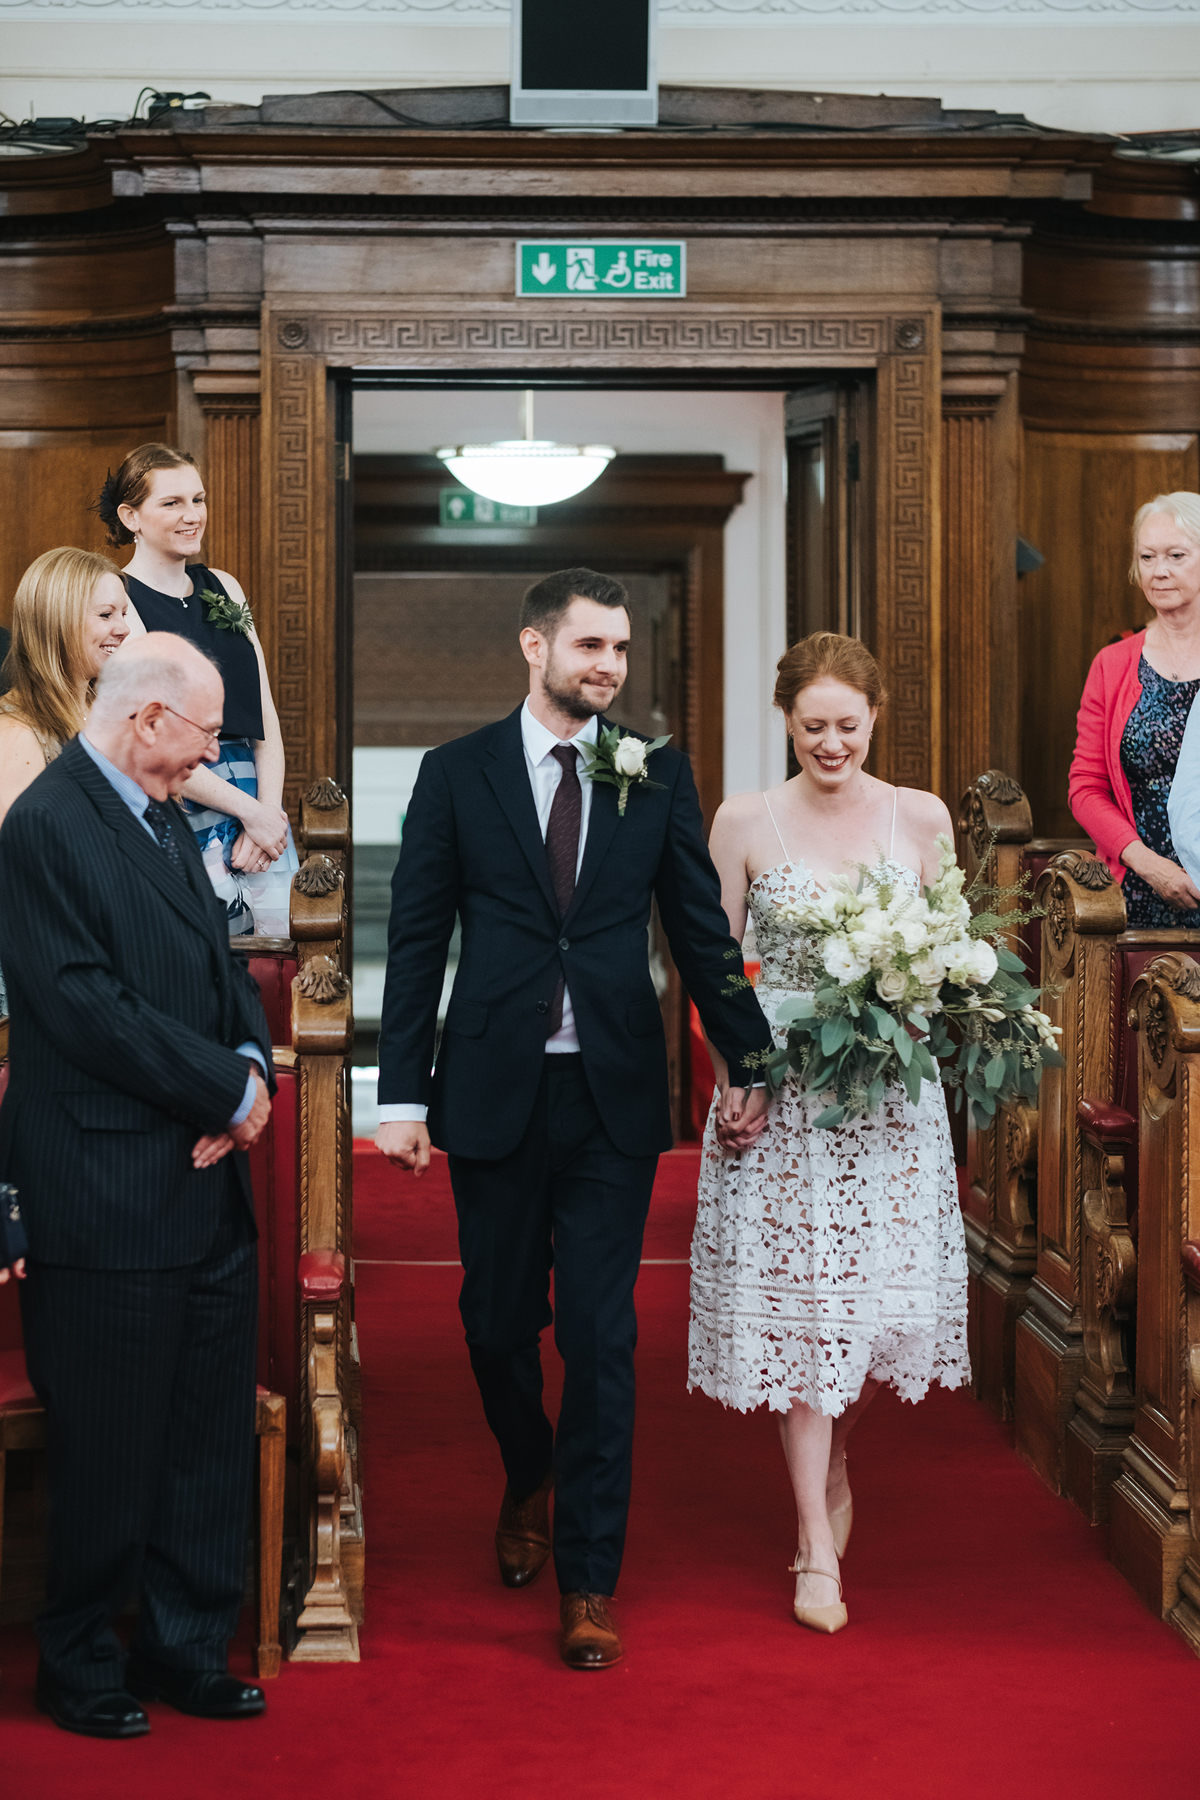 Couple entering the ceremony together at Islington Town Hall